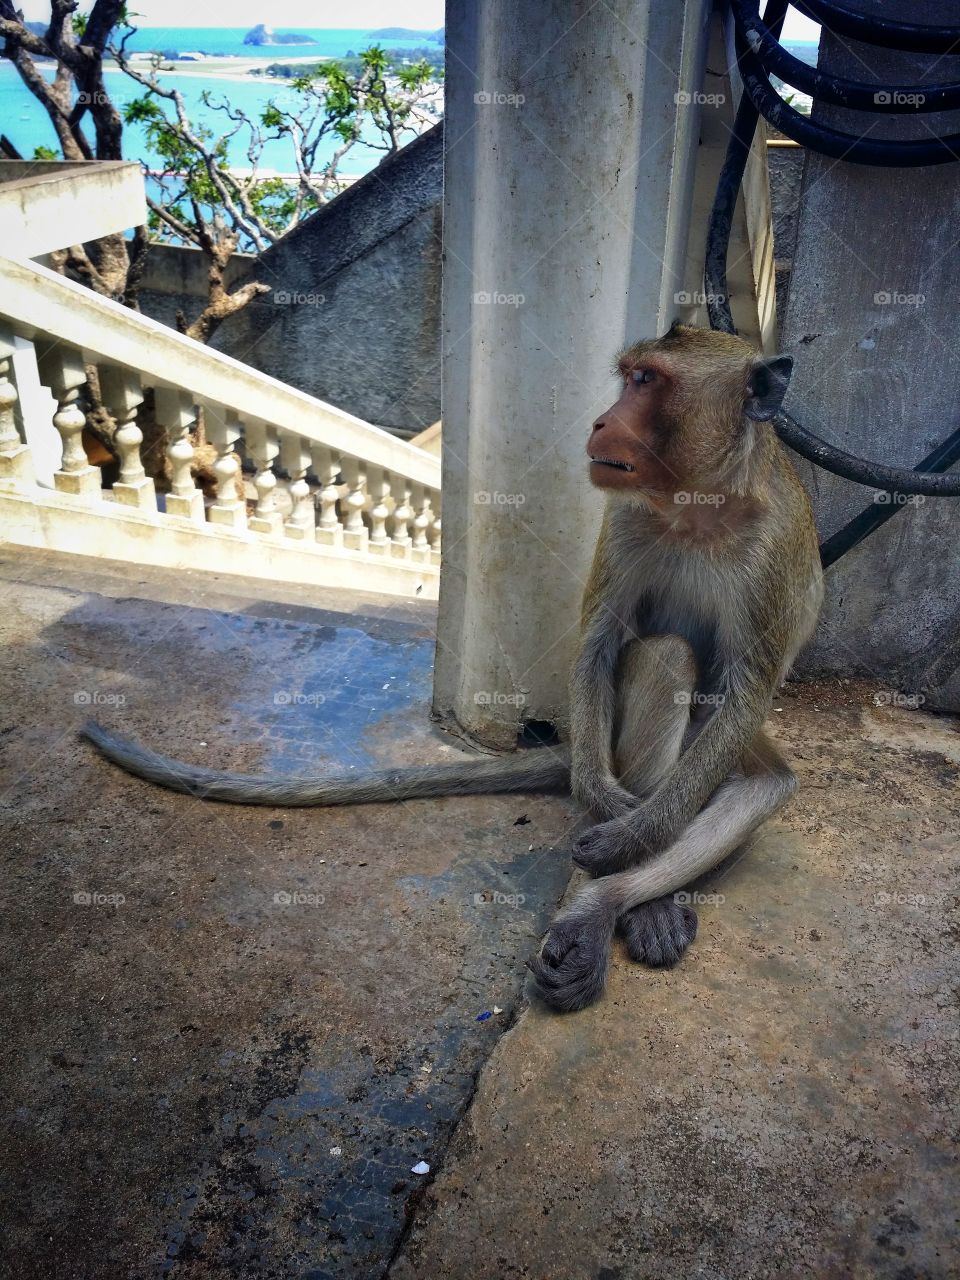 The monkey is sitting in summer.